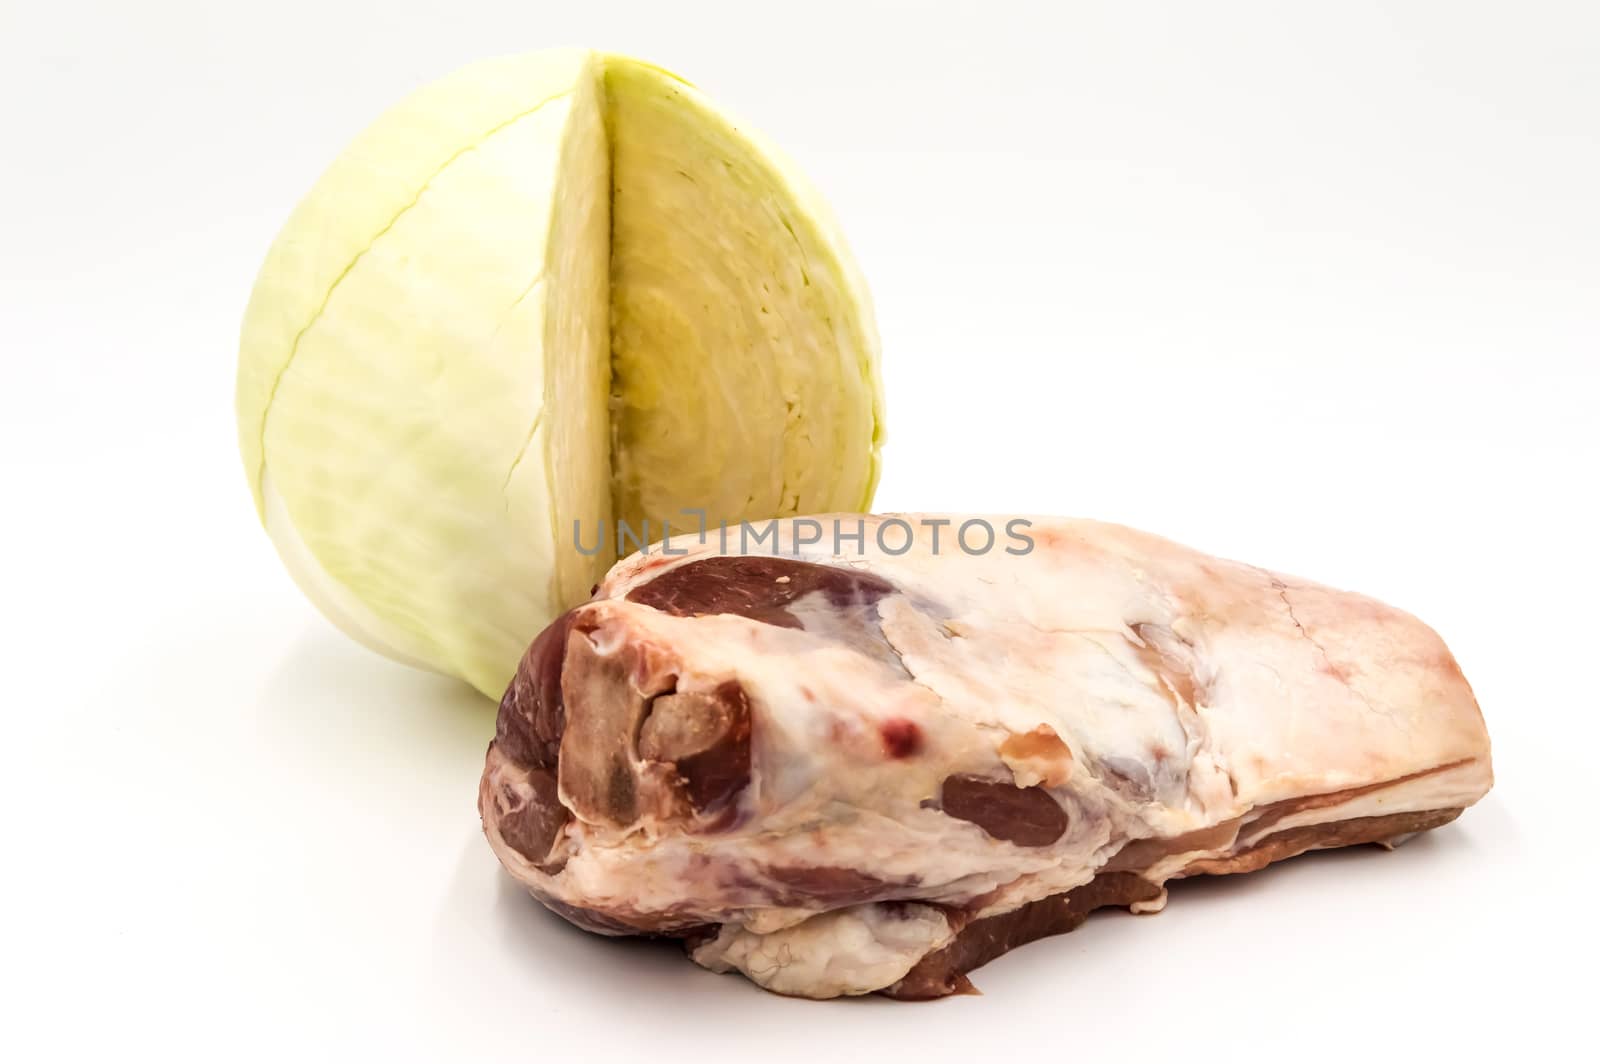 Lamb shoulder and white cabbage  by Philou1000